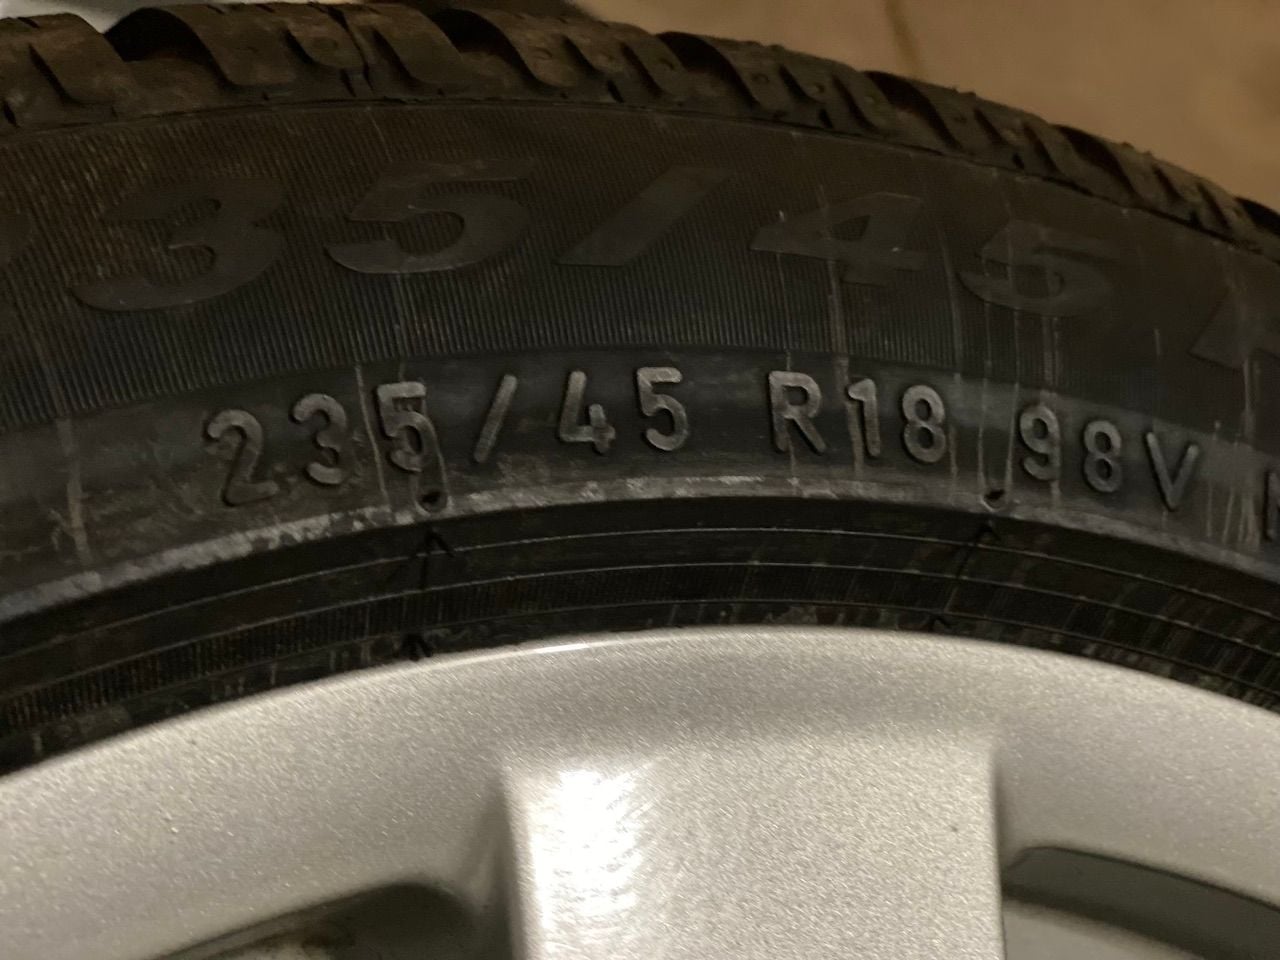 Wheels and Tires/Axles - Cayman/Boxster Winter Tires & Wheels - Used - Cambridge, ON N1R7V2, Canada